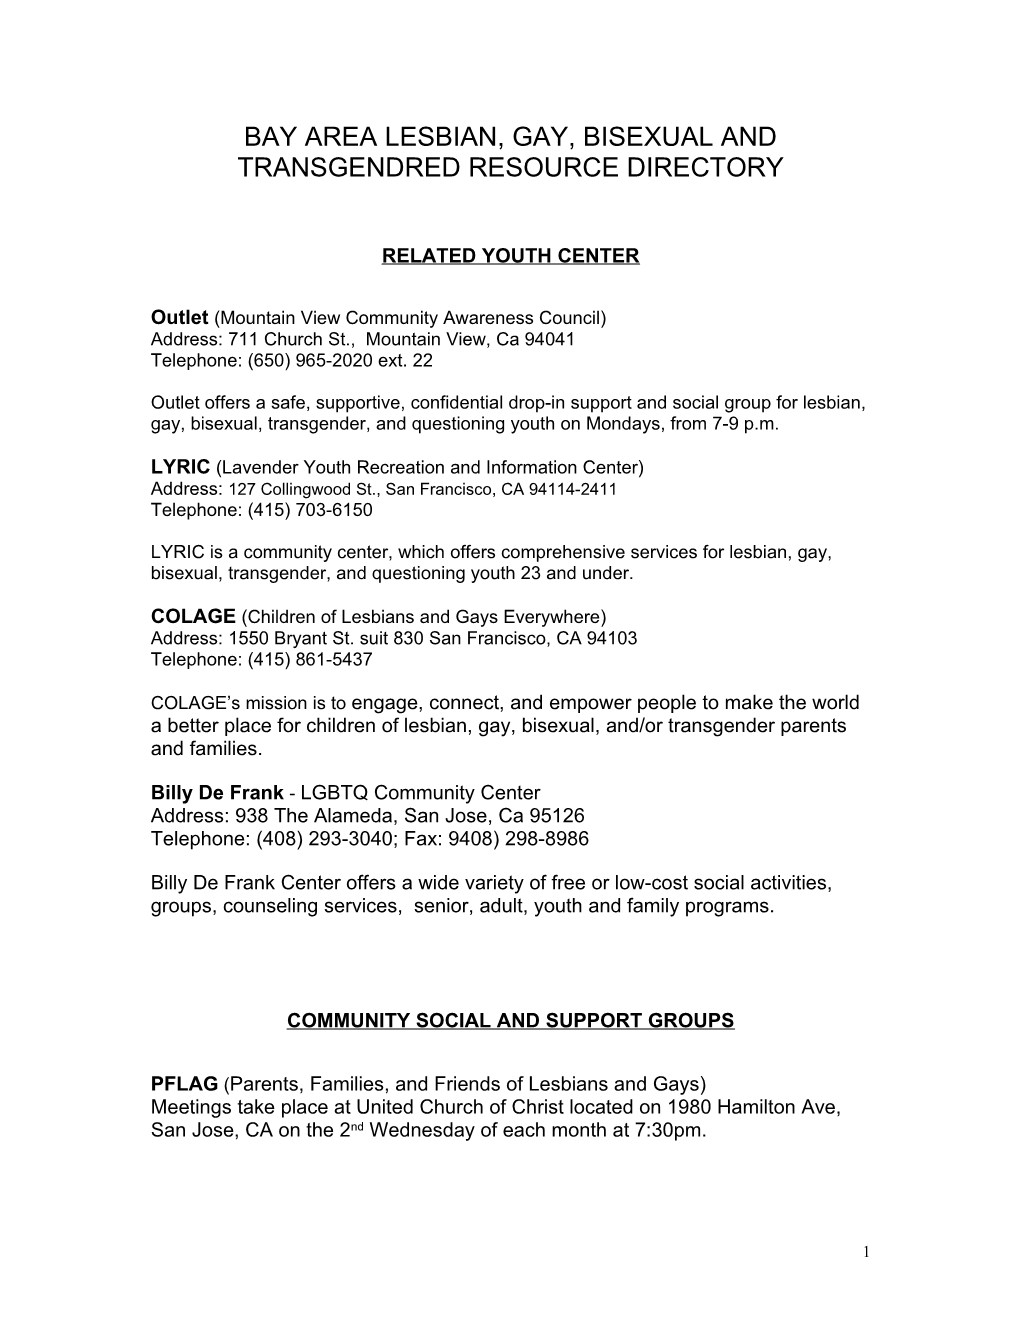 Bay Area Lesbian, Gay, Bisexual and Transgendred Resource Directory